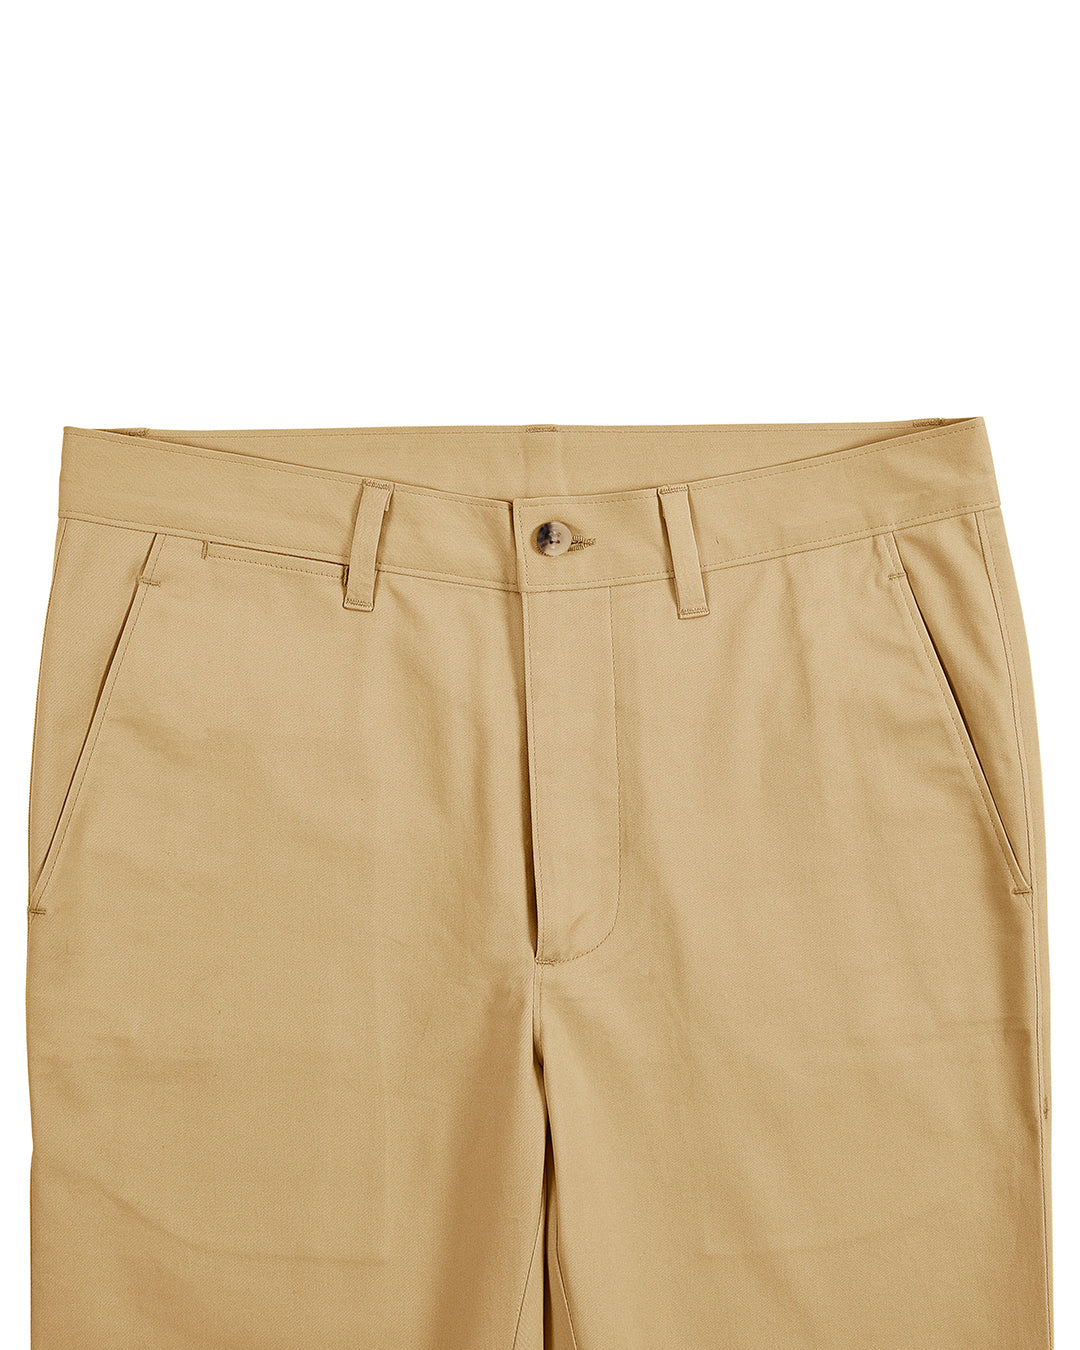 Front view of custom Genoa Chino pants for men by Luxire in golden corn